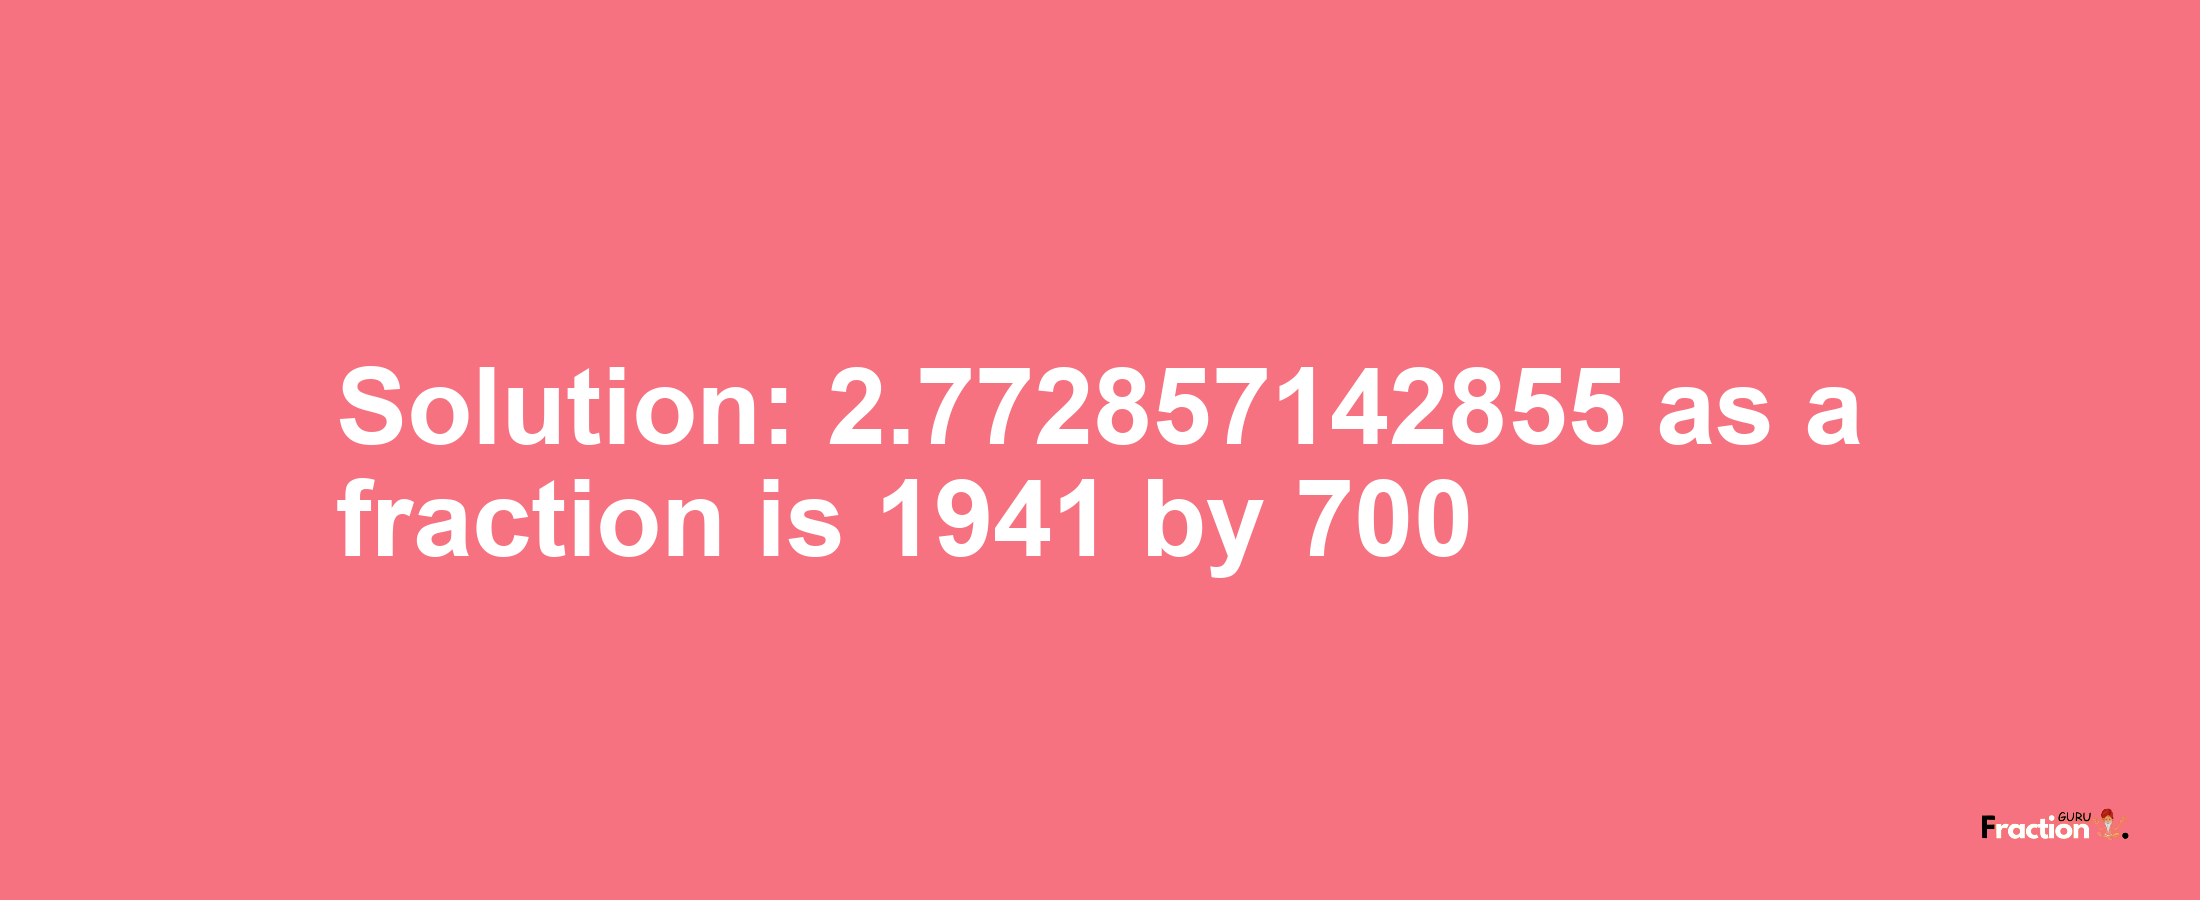 Solution:2.772857142855 as a fraction is 1941/700